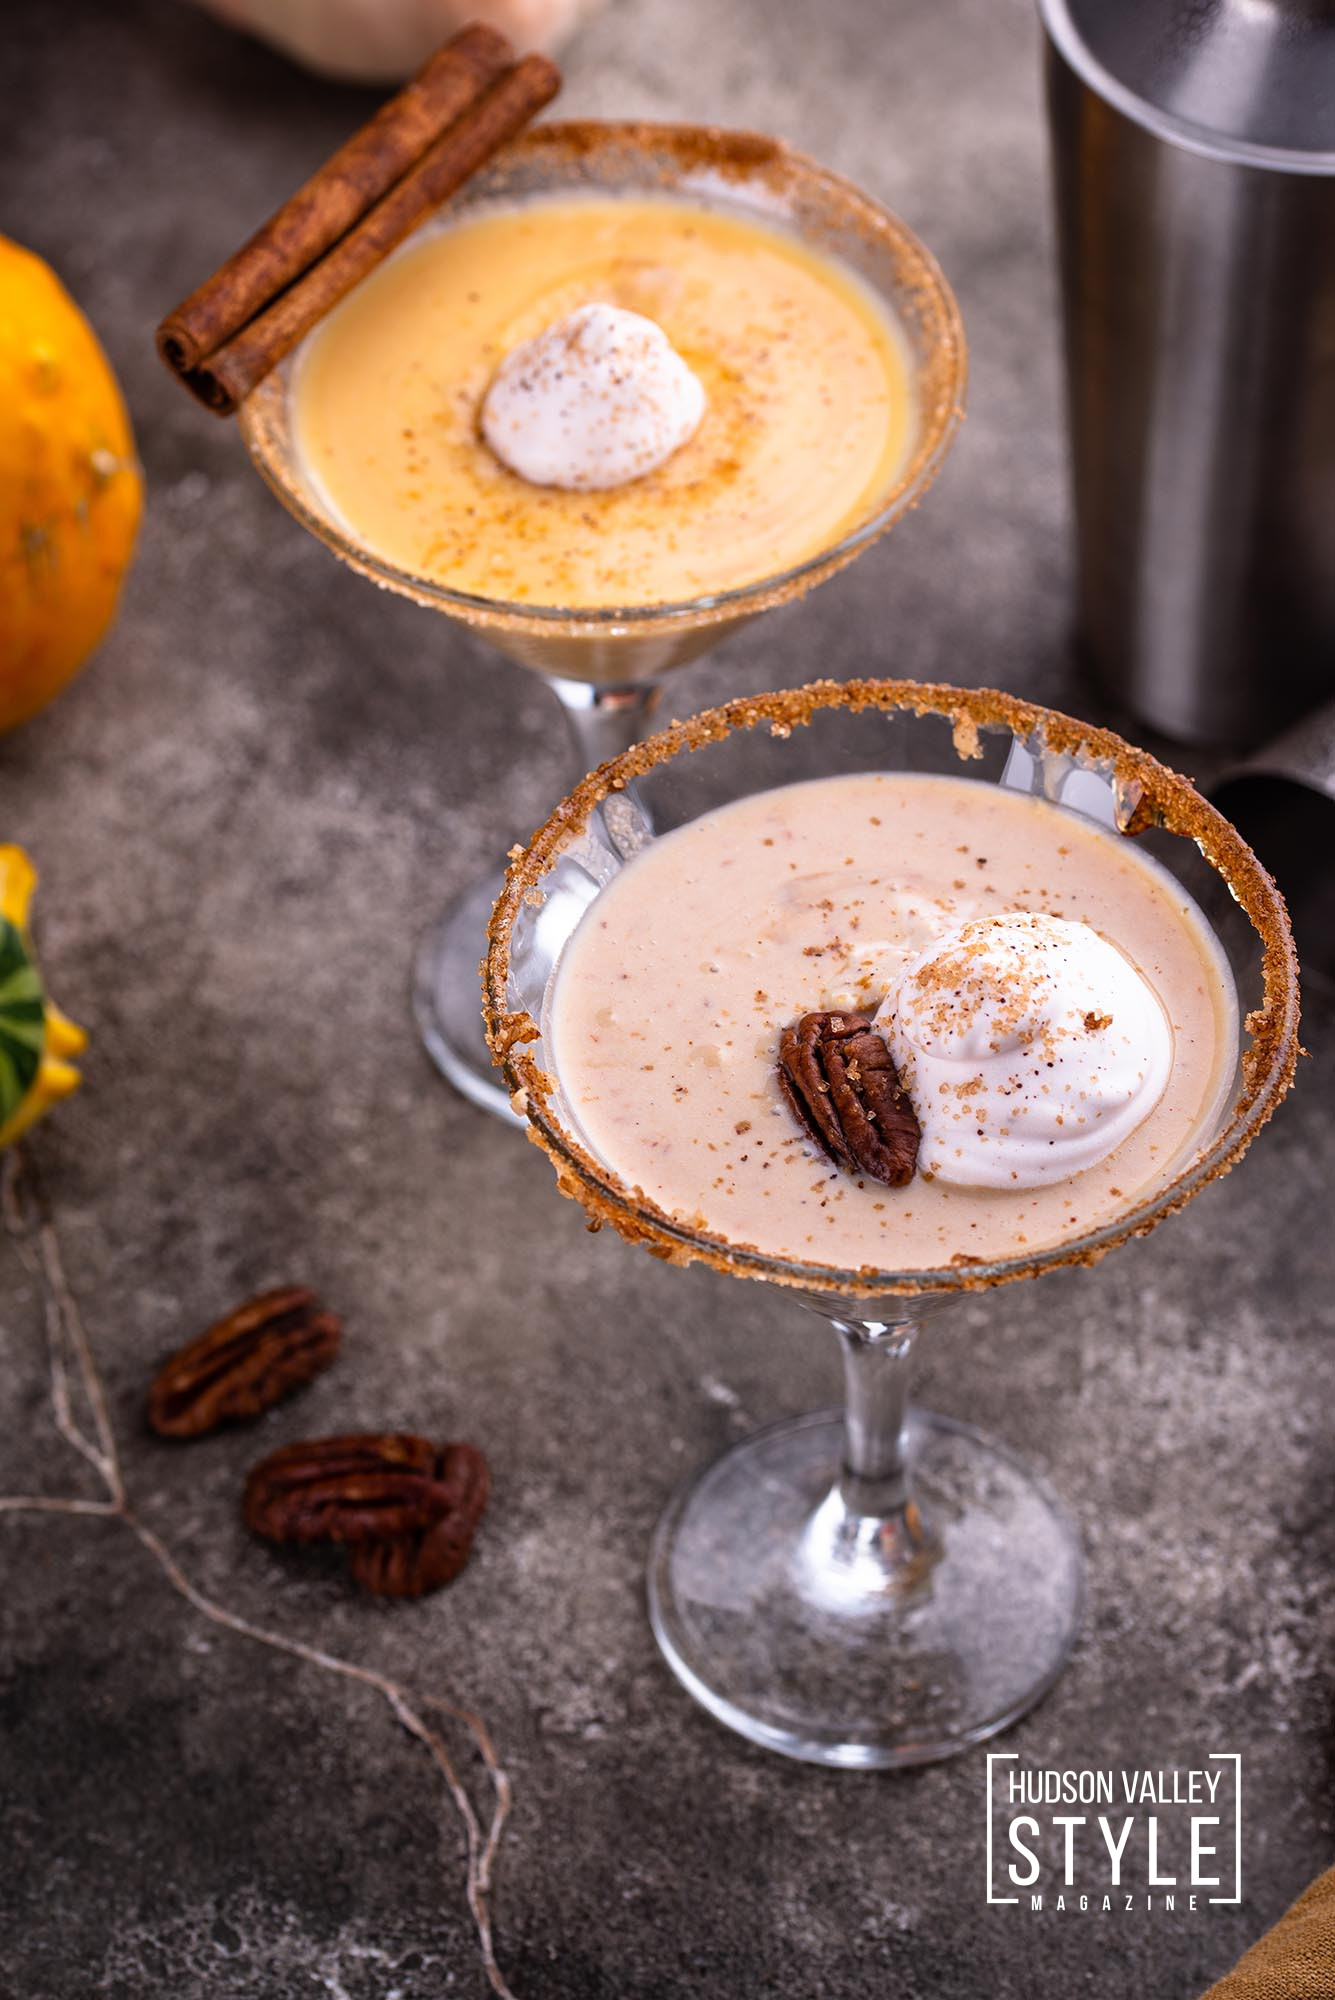 Fall Mixology in the Hudson Valley: The Creamy Pumpkin-Pecan Martini and More! – Presented by Alluvion Vacations – The Best Airbnb Getaways in the Hudson Valley and Catskills